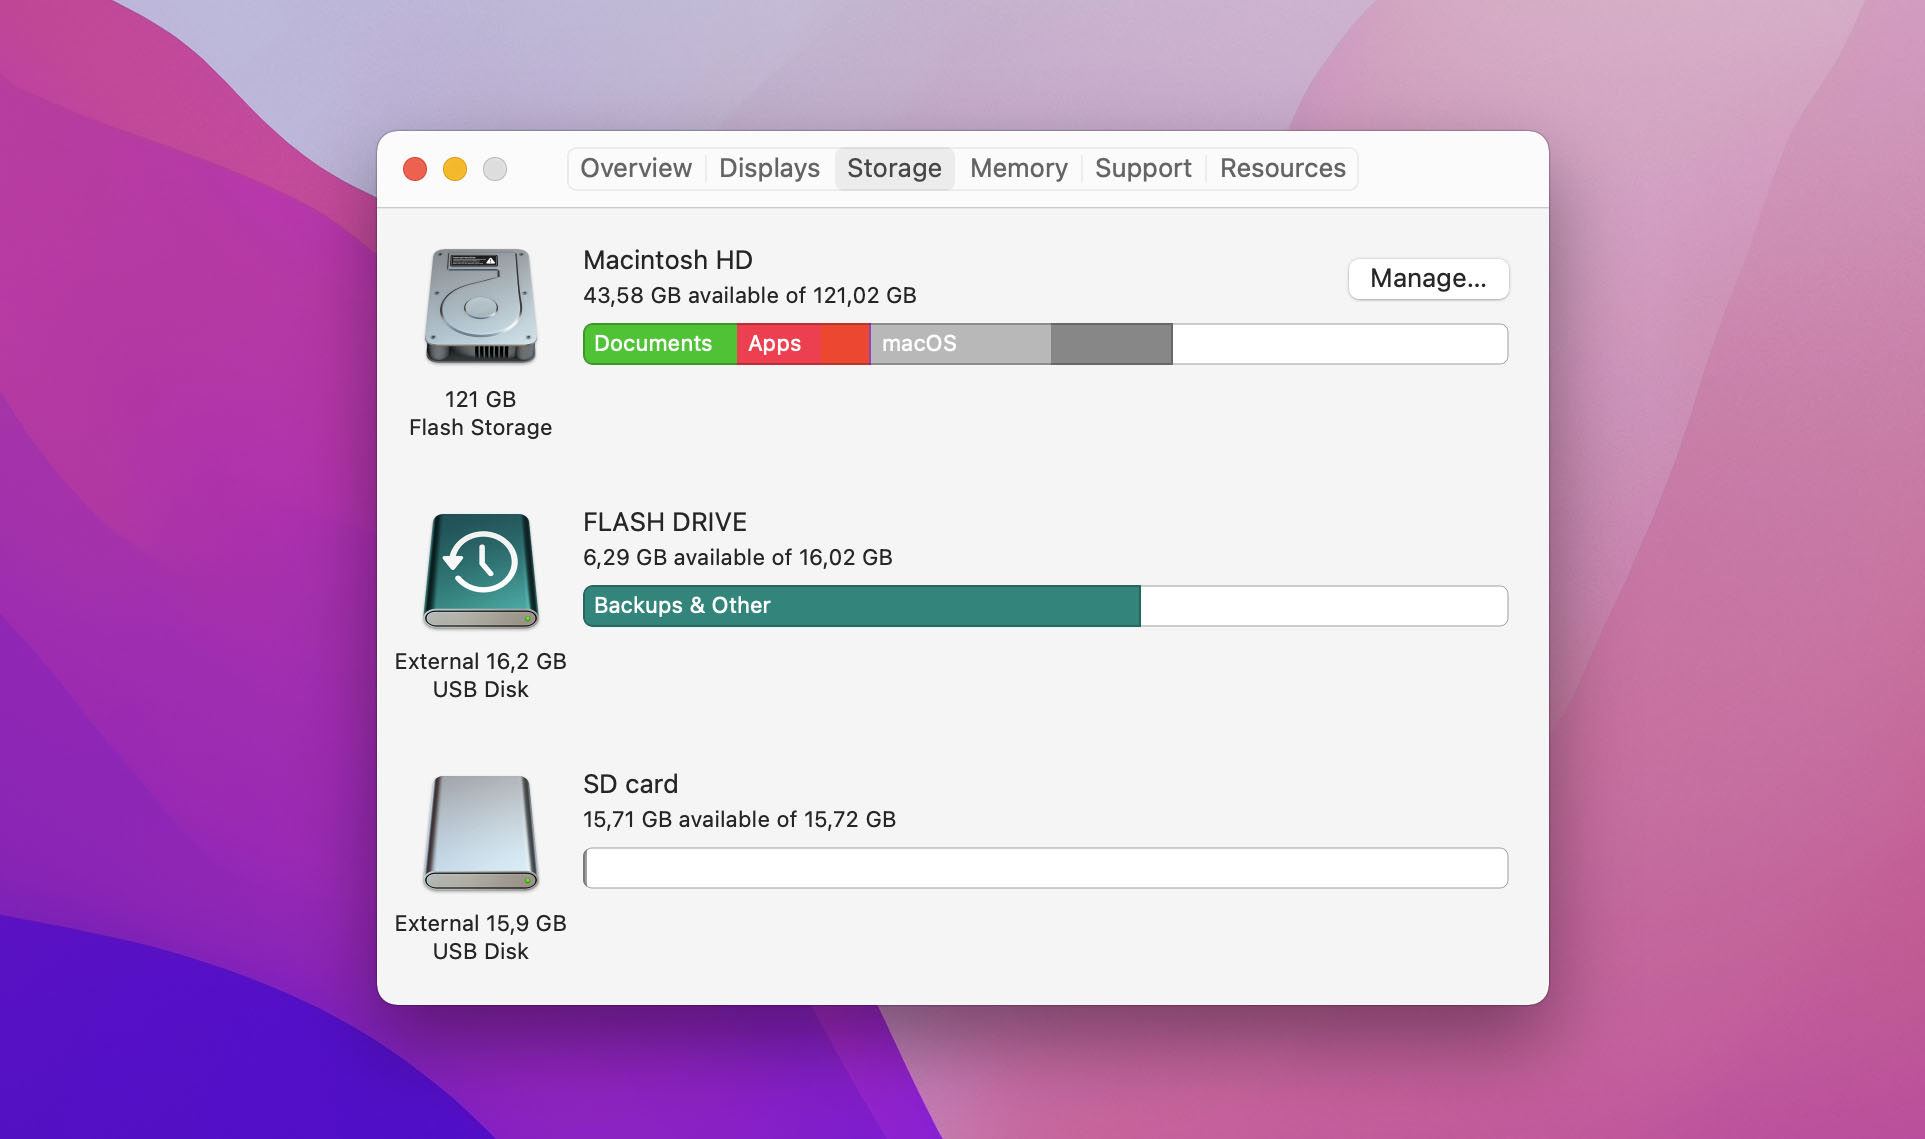 Click on Storage to view a display of your Mac’s storage